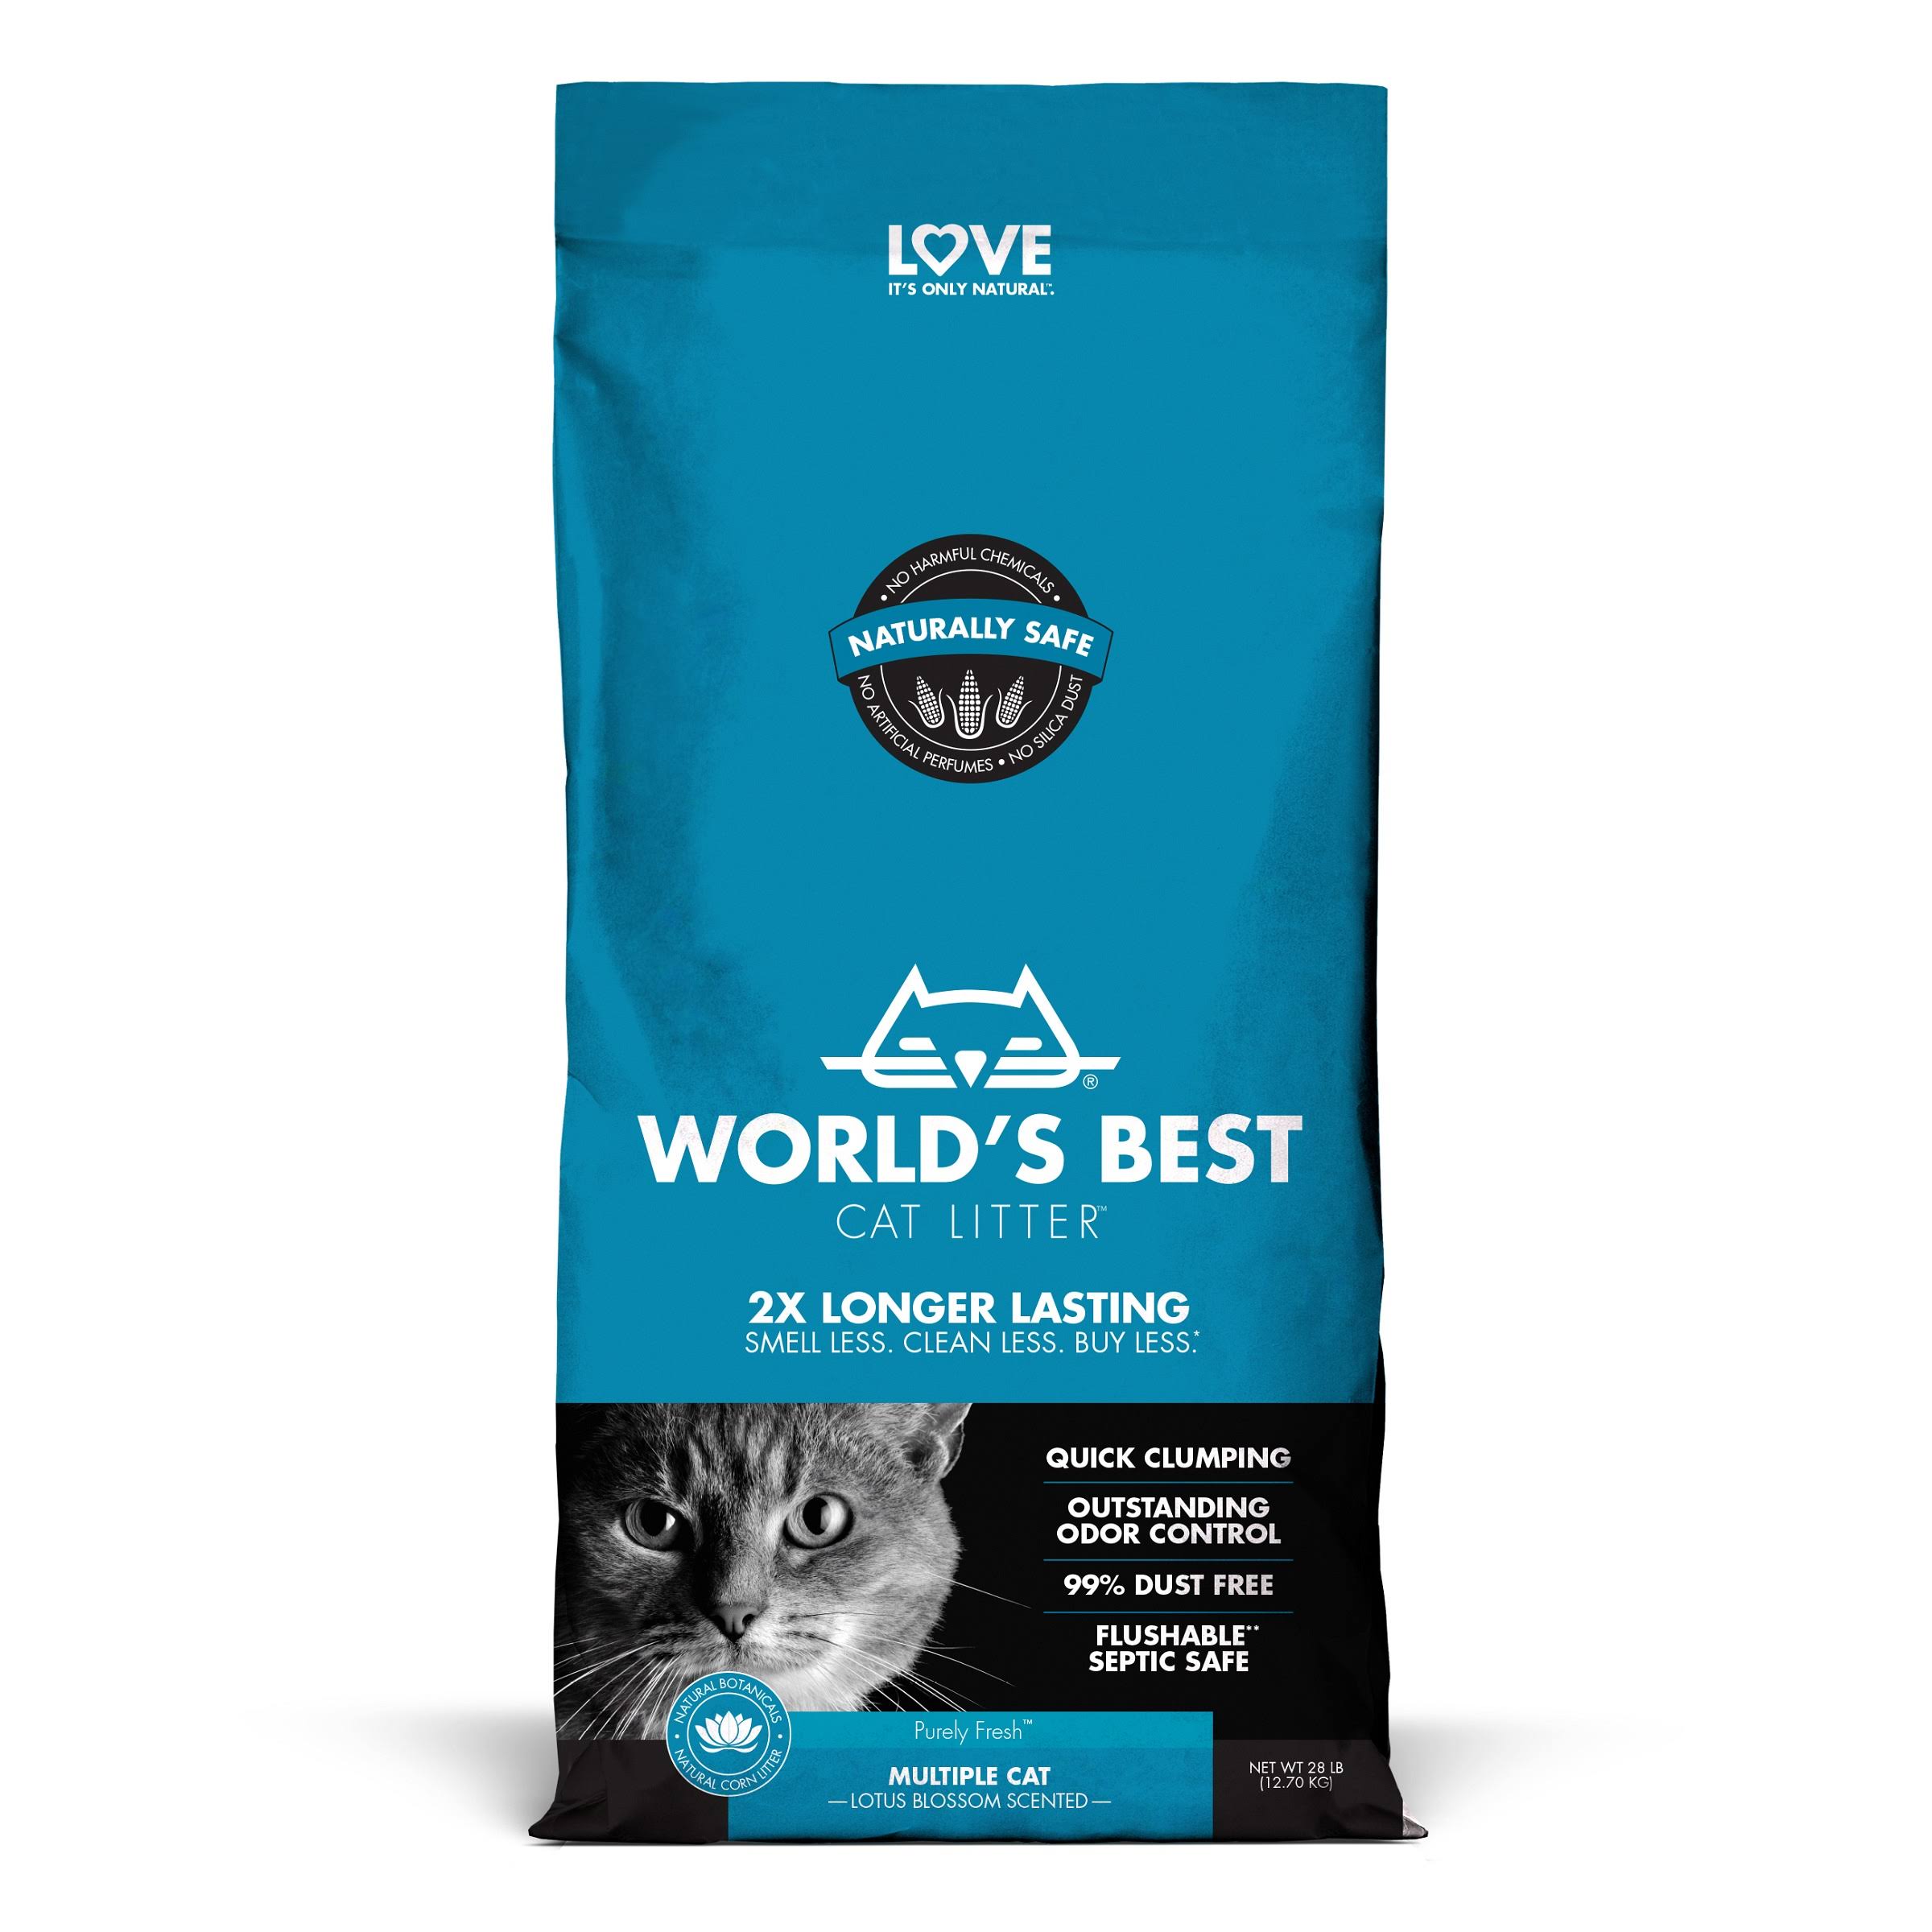 World's Best Cat Litter Lotus Blossom Scented Formula - 28lbs